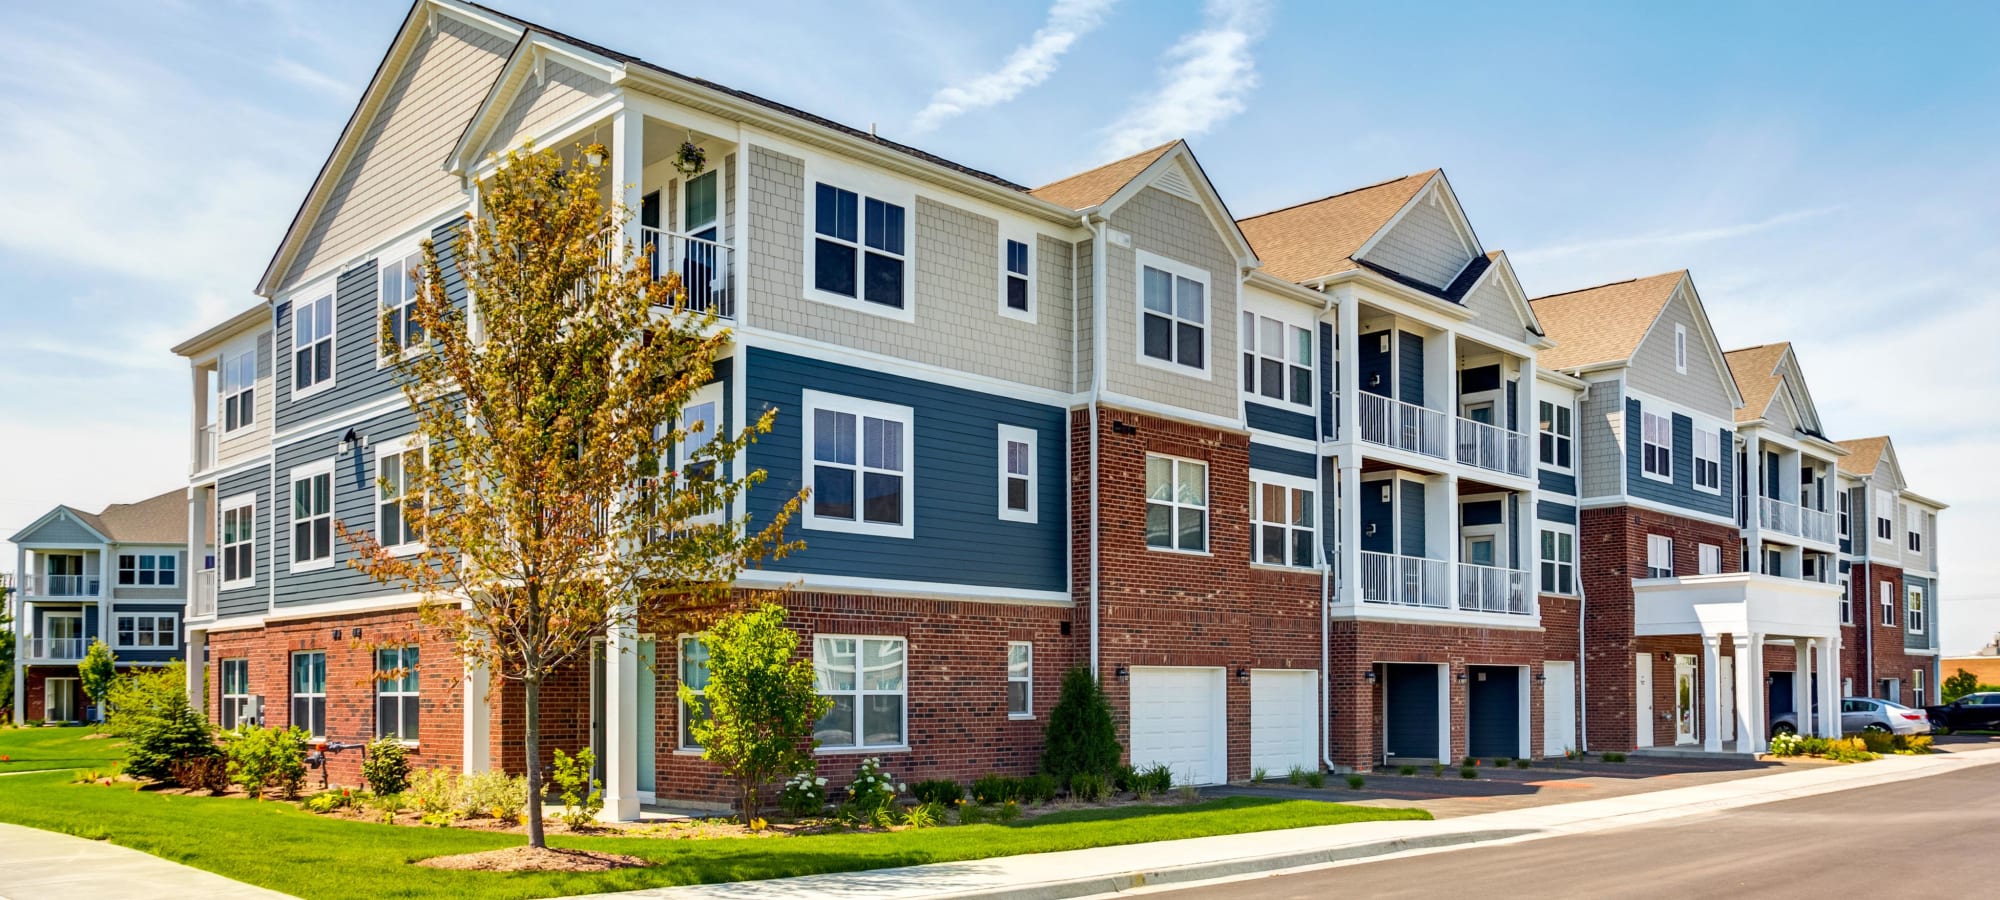 Apartments at Northgate Crossing in Wheeling, Illinois